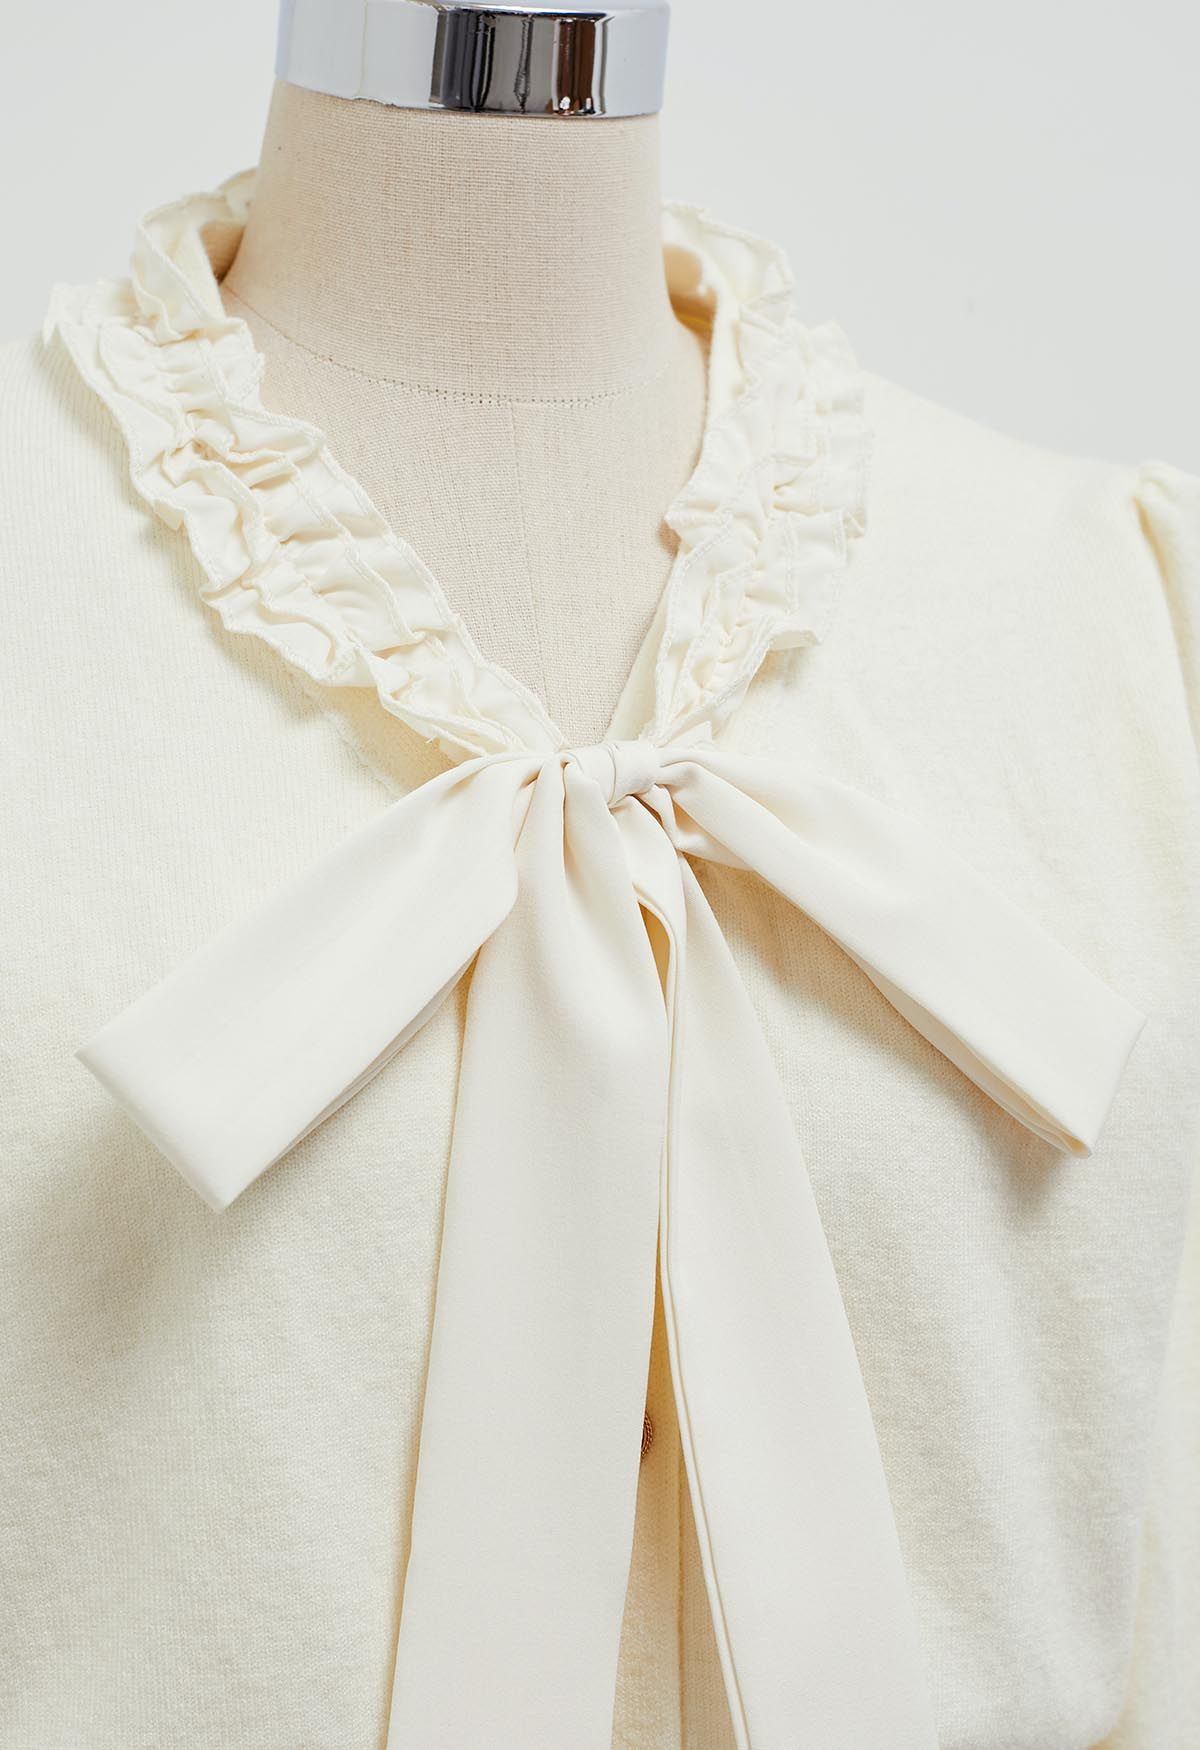 Ruffle Tie-Bow Wool-Blend Buttoned Top in Cream